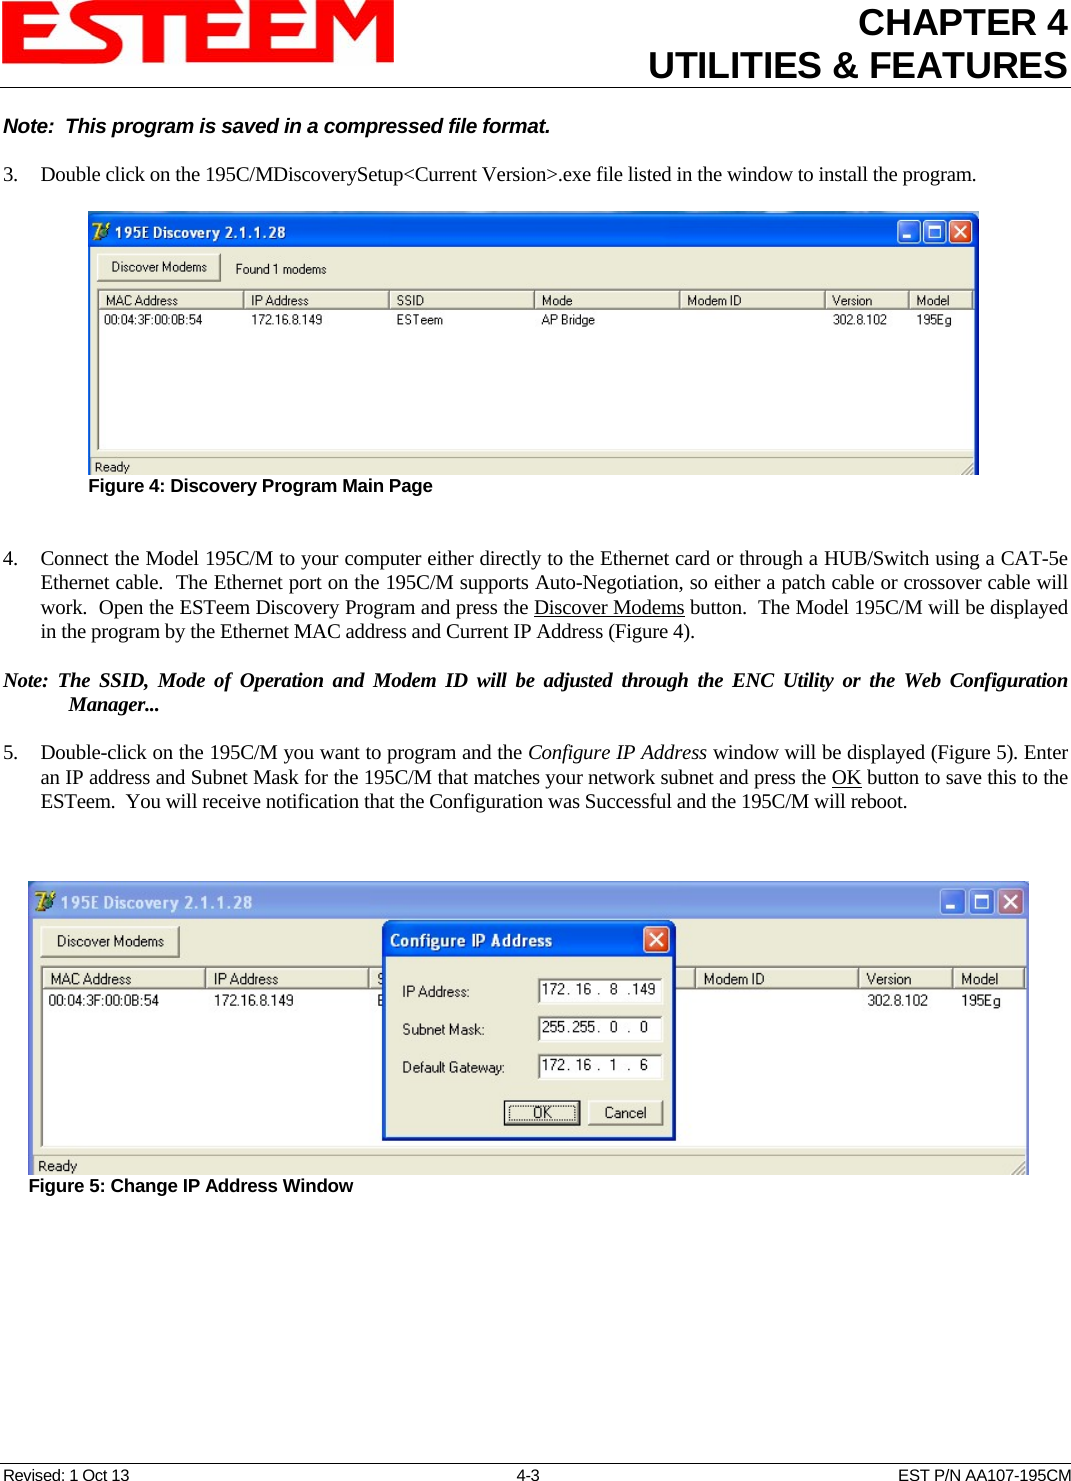 CHAPTER 4UTILITIES &amp; FEATURES  Note:  This program is saved in a compressed file format.  3. Double click on the 195C/MDiscoverySetup&lt;Current Version&gt;.exe file listed in the window to install the program.  Figure 4: Discovery Program Main Page  4. Connect the Model 195C/M to your computer either directly to the Ethernet card or through a HUB/Switch using a CAT-5e Ethernet cable.  The Ethernet port on the 195C/M supports Auto-Negotiation, so either a patch cable or crossover cable will work.  Open the ESTeem Discovery Program and press the Discover Modems button.  The Model 195C/M will be displayed in the program by the Ethernet MAC address and Current IP Address (Figure 4).    Note: The SSID, Mode of Operation and Modem ID will be adjusted through the ENC Utility or the Web Configuration Manager...     5. Double-click on the 195C/M you want to program and the Configure IP Address window will be displayed (Figure 5). Enter an IP address and Subnet Mask for the 195C/M that matches your network subnet and press the OK button to save this to the ESTeem.  You will receive notification that the Configuration was Successful and the 195C/M will reboot.   Figure 5: Change IP Address Window  Revised: 1 Oct 13  4-3  EST P/N AA107-195CM 